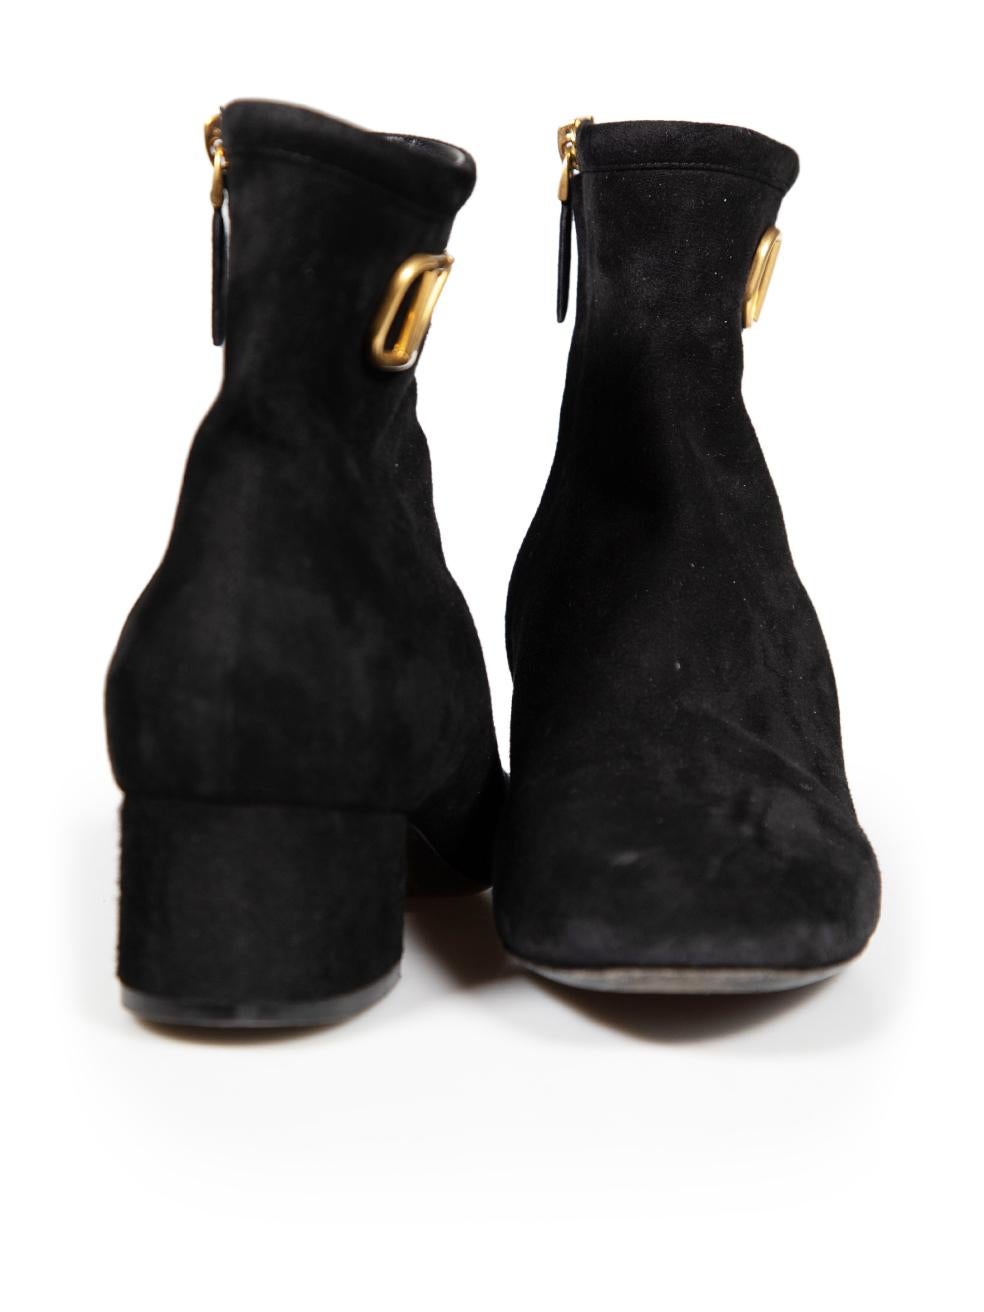 Valentino Garavani Black Suede VLogo Signature Ankle Boots Size IT 39 In Excellent Condition For Sale In London, GB